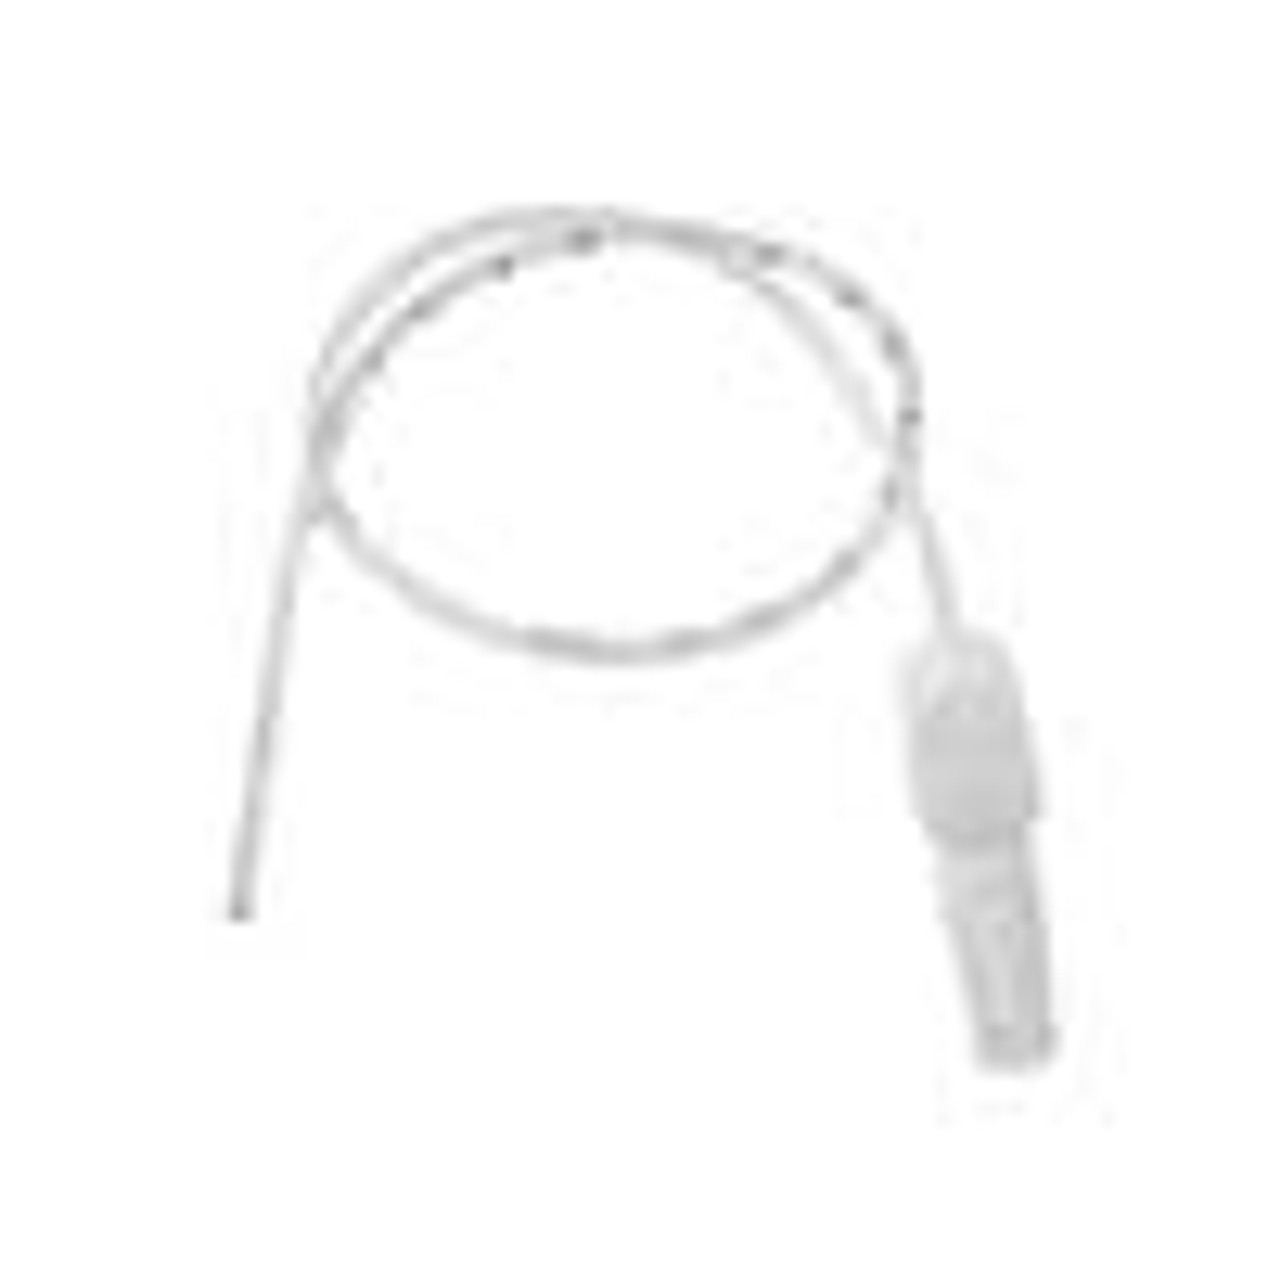 MEDRX 50-1008 BX/50 8FR 21" STERILE STRAIGHT SUCTION CATHETER W/CONTROL VALVE (MEDRX 50-1008)